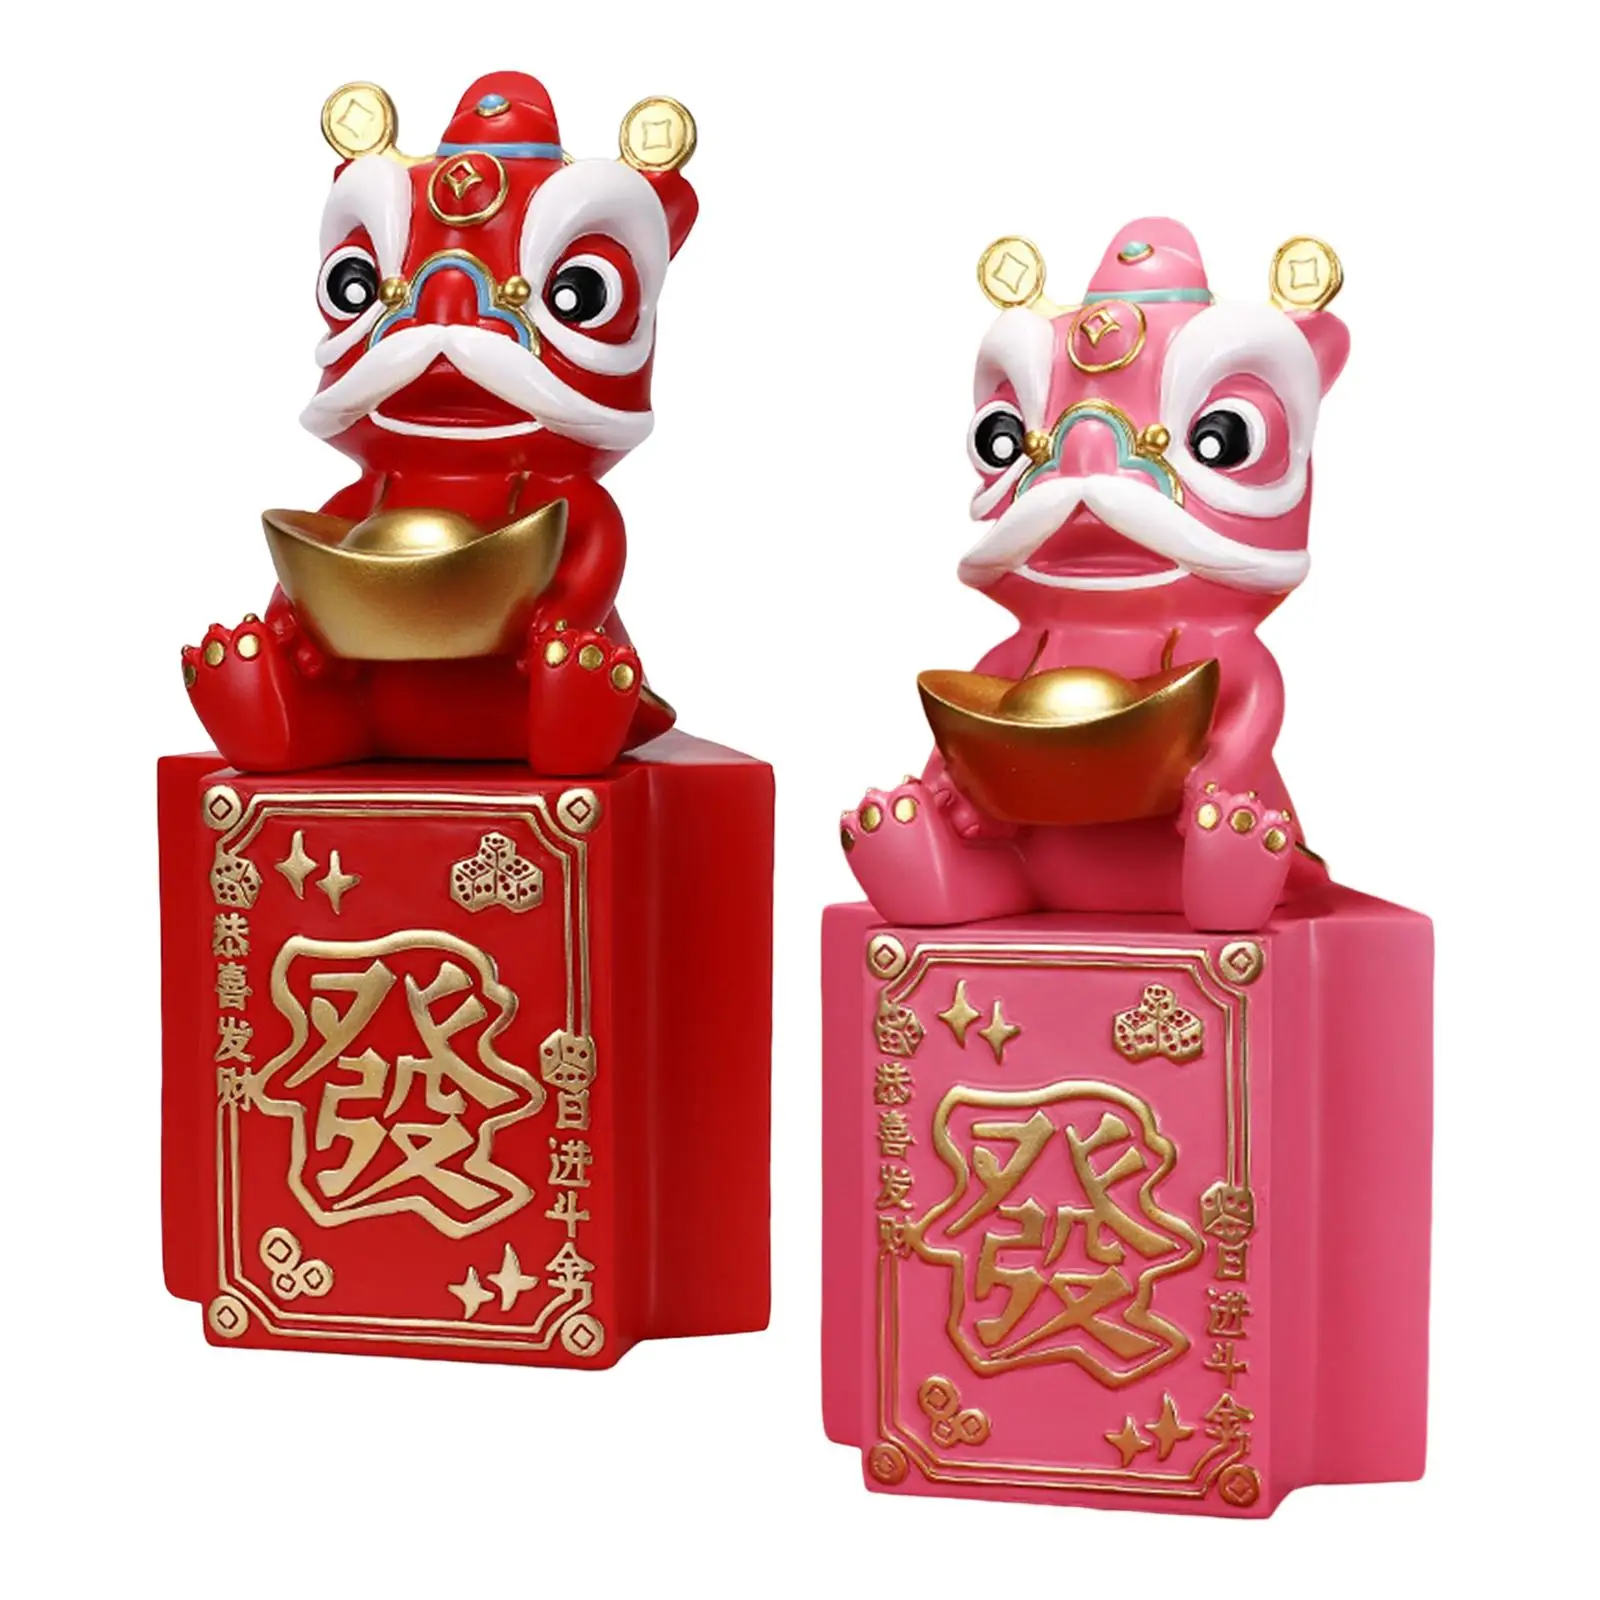 Resin Chinese Piggy Bank Figurine Feng Shui Statue Sculpture Saving Box for Living Room Office Home Decor Ornament